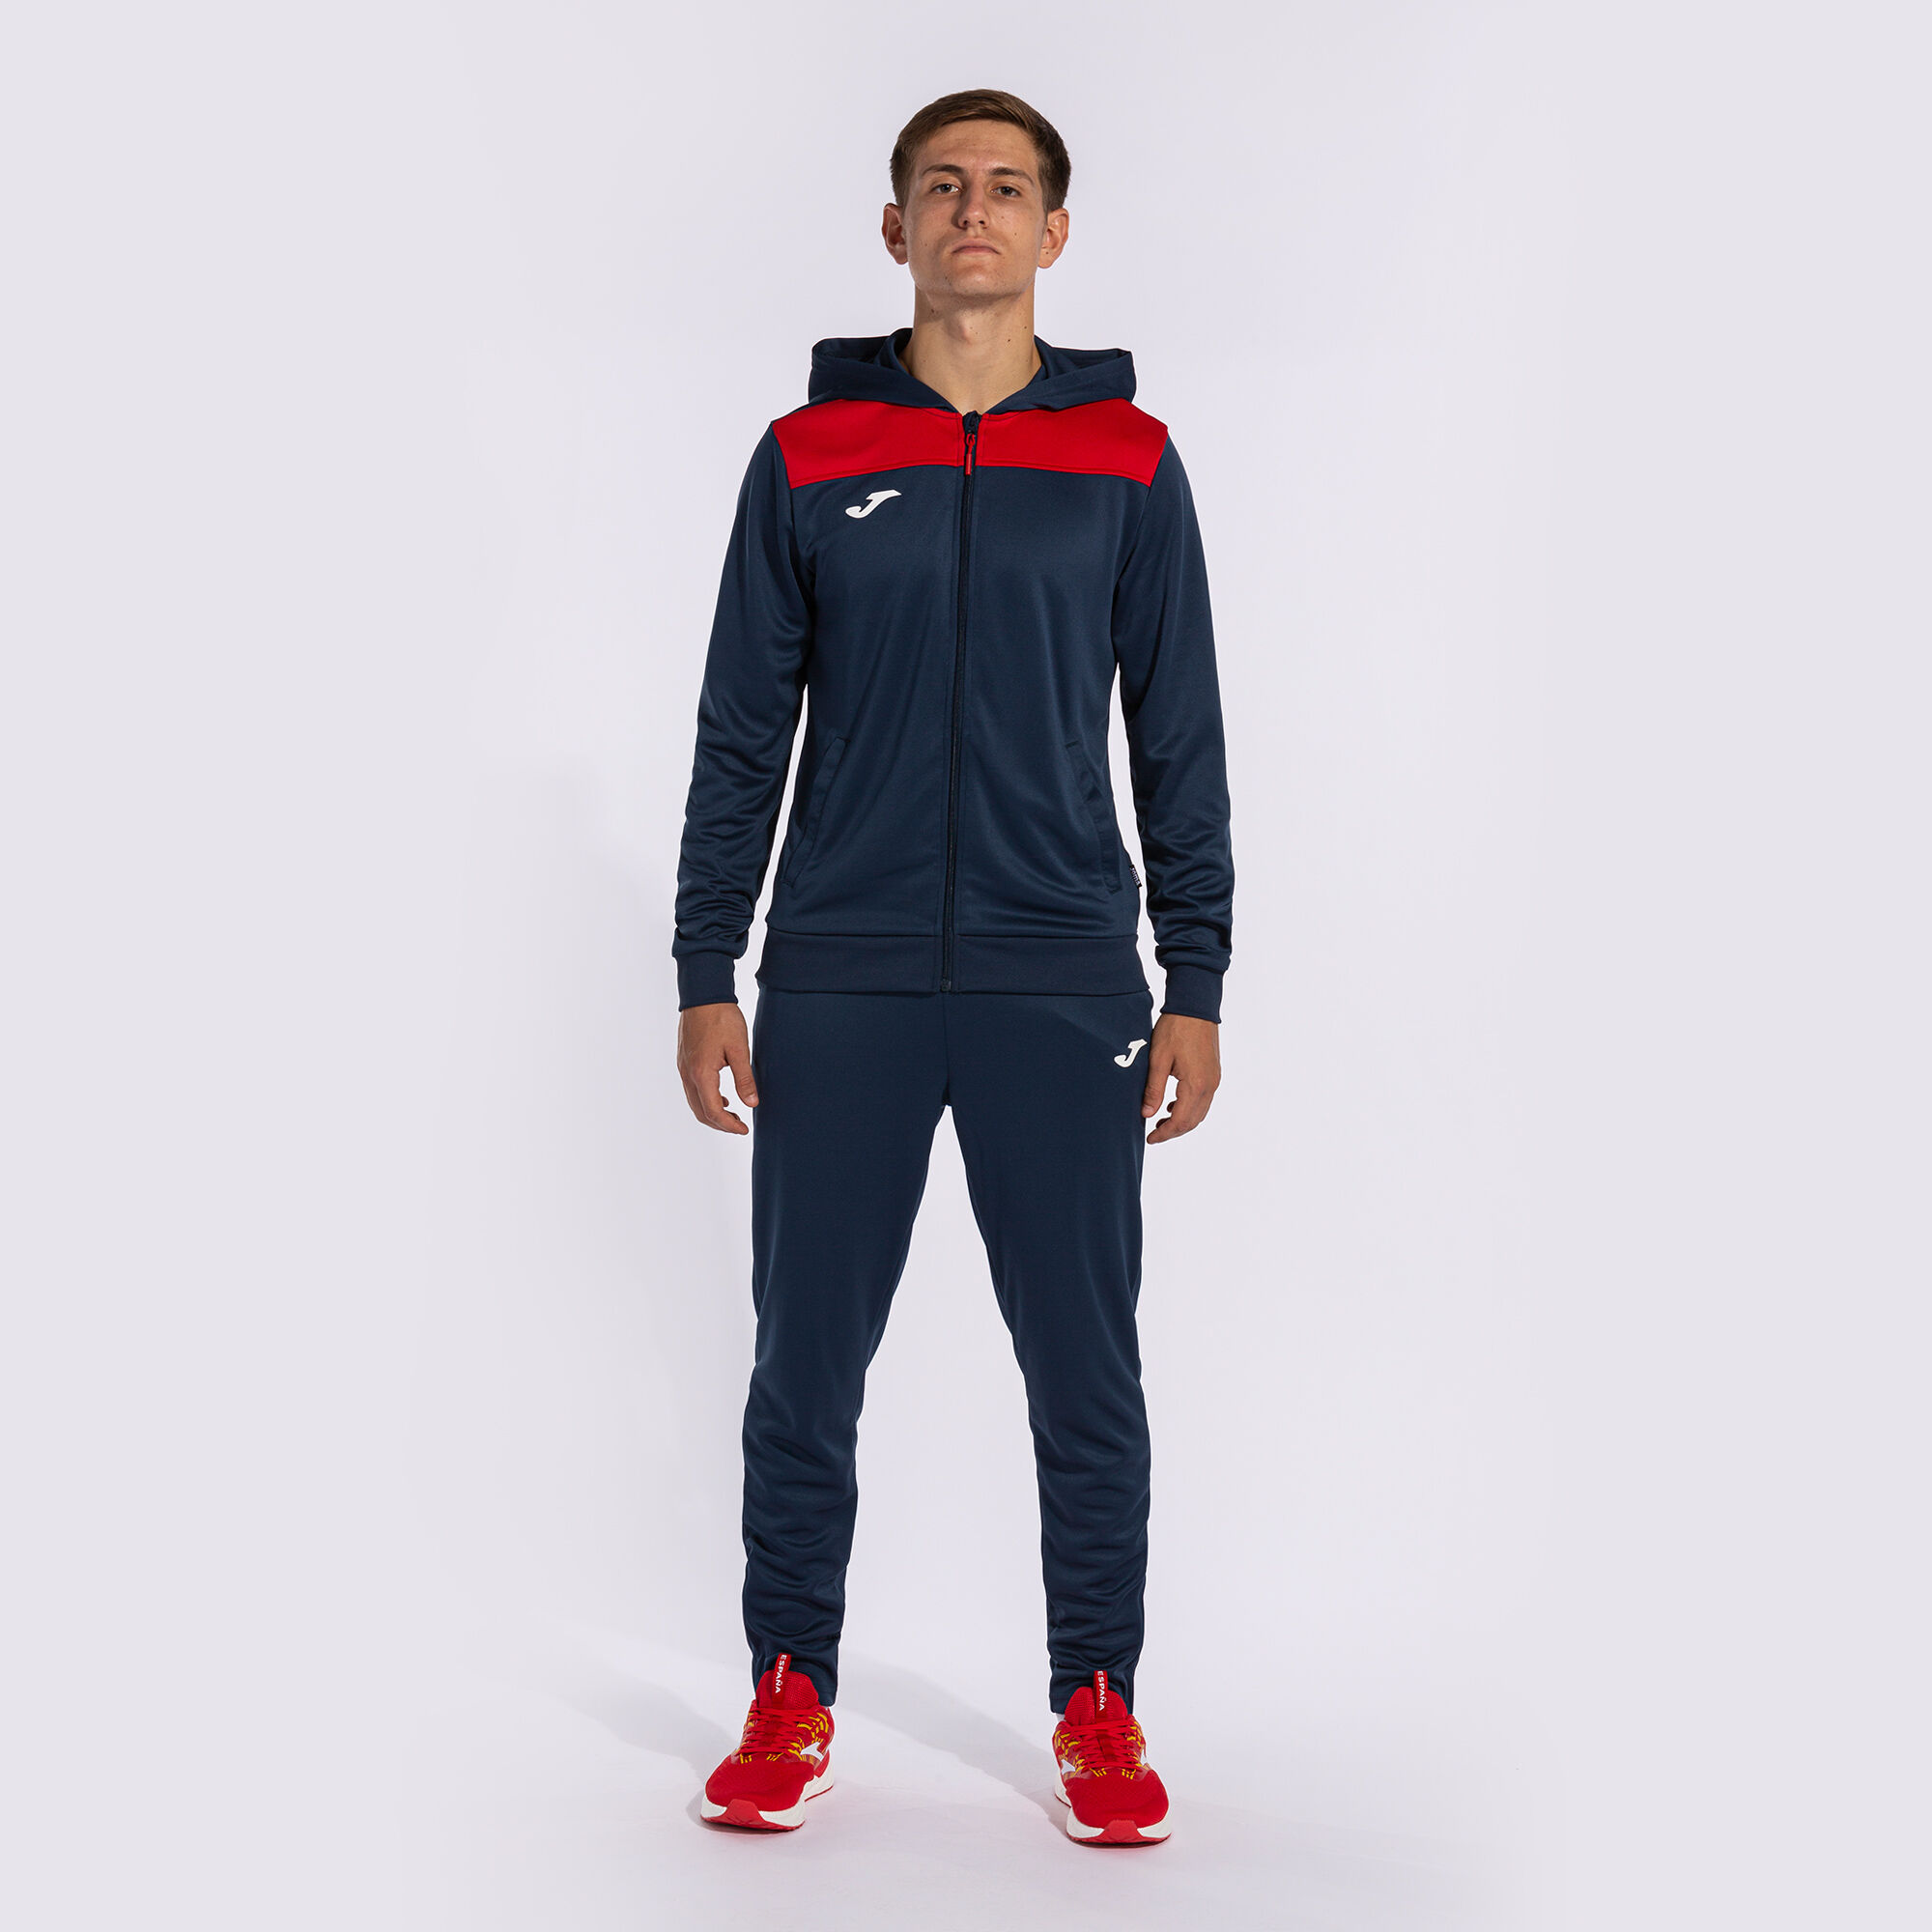 Longue manche rouge Joma homme foot S - Sports2Life